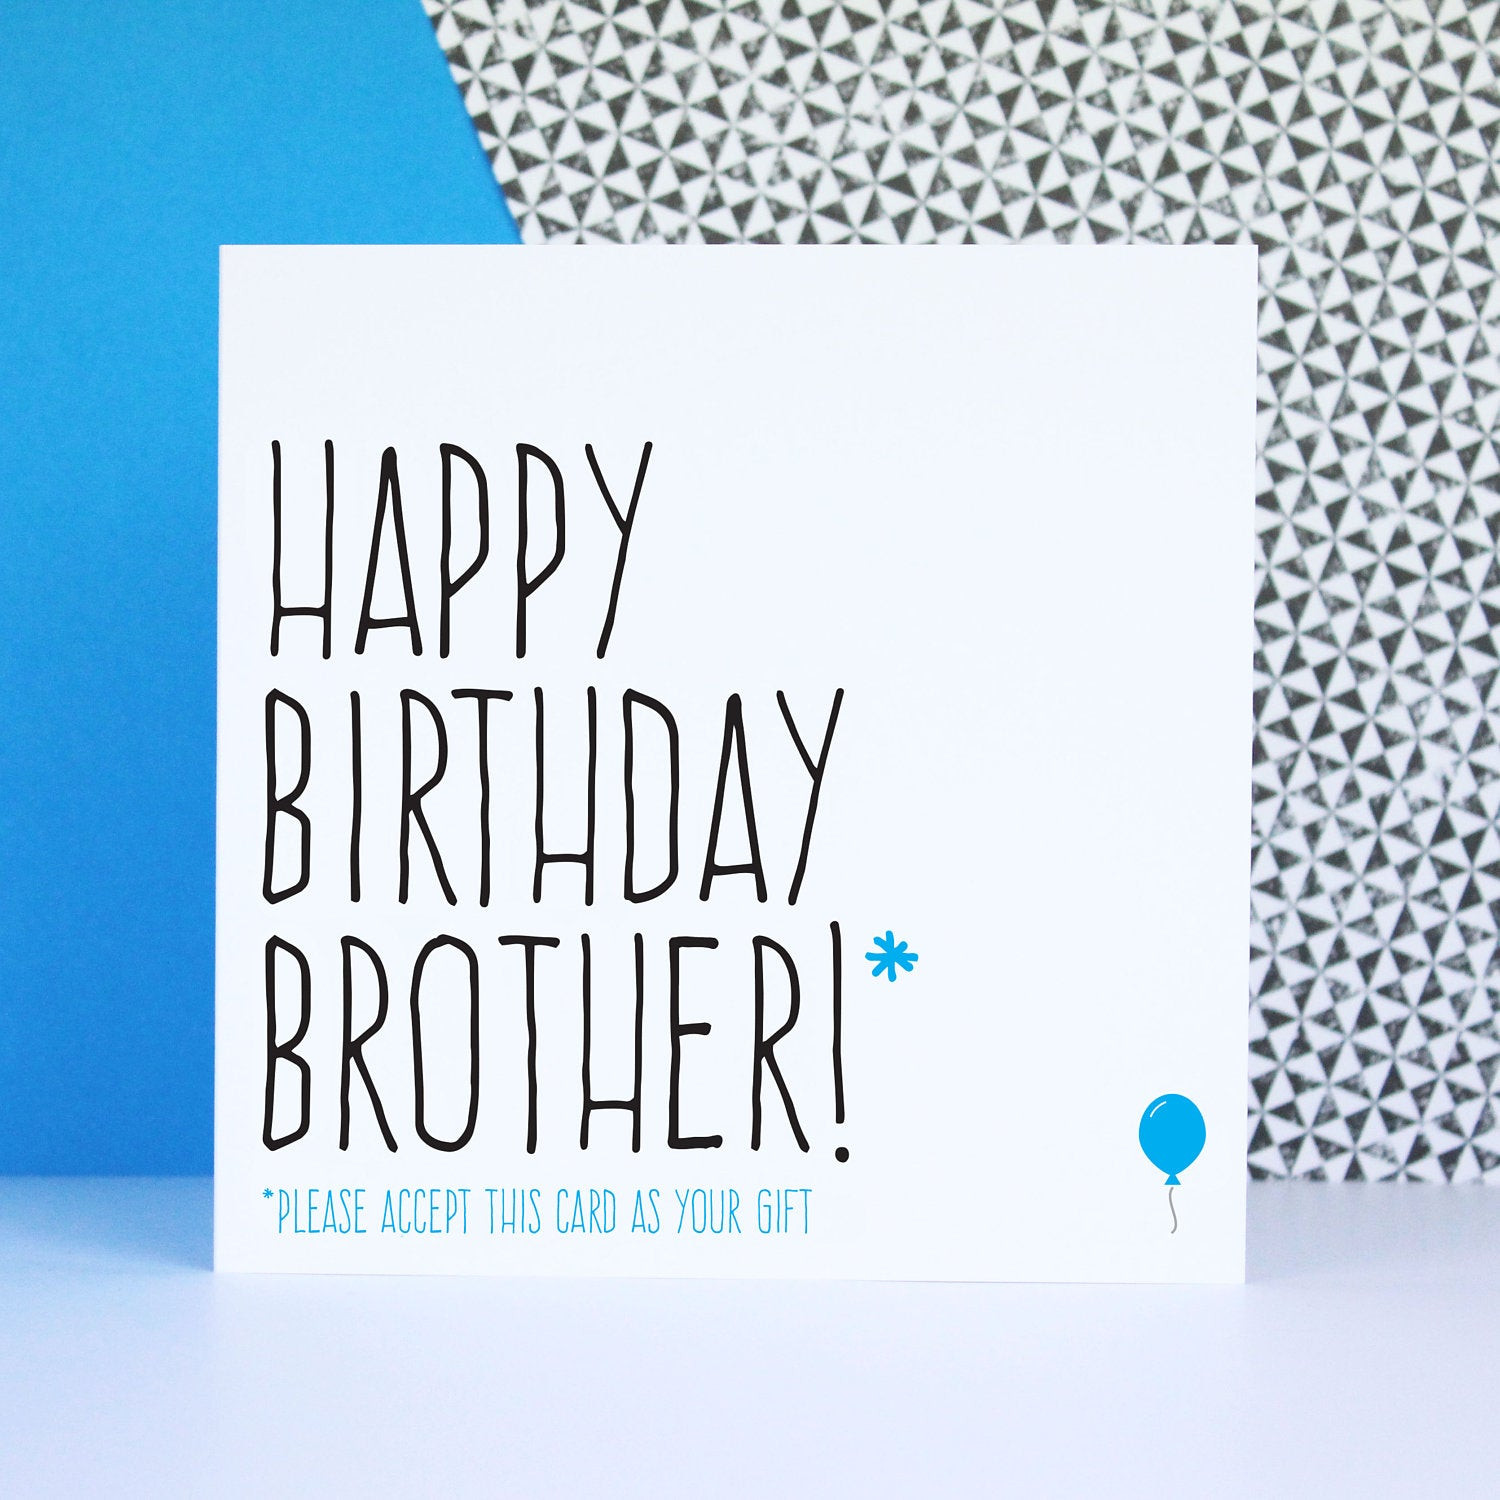 Funny Birthday Cards For Brother
 Funny brother birthday card Birthday card for brother Happy